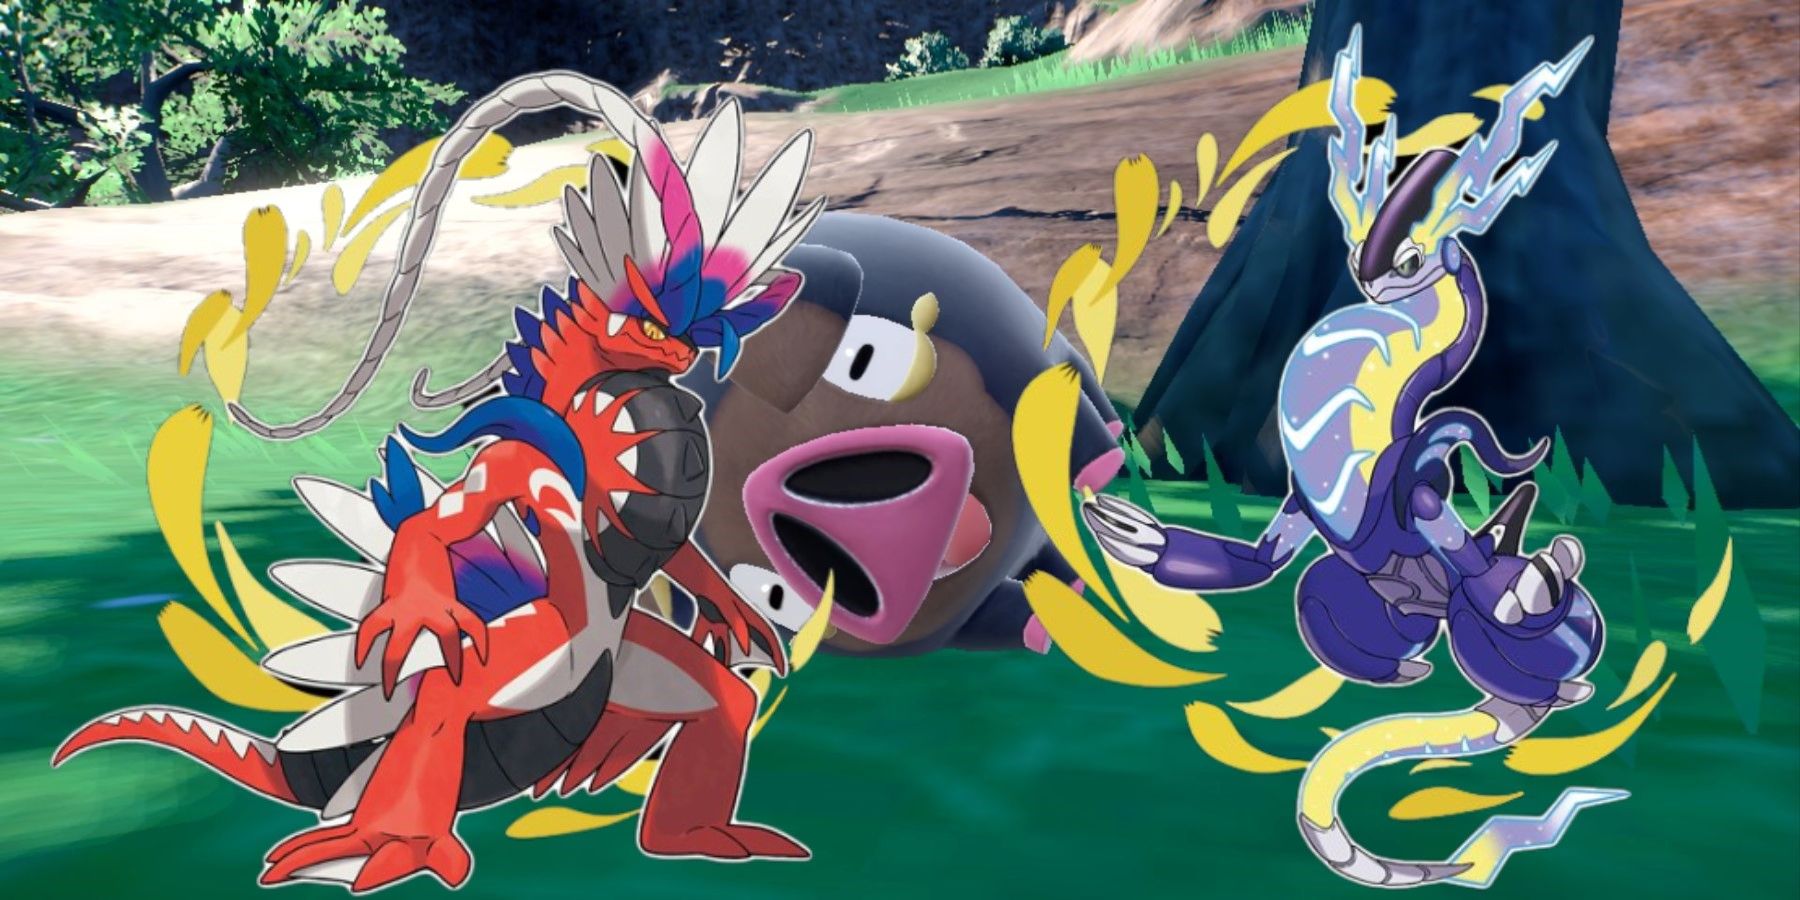 An All-New Pokémon Series Is Coming 